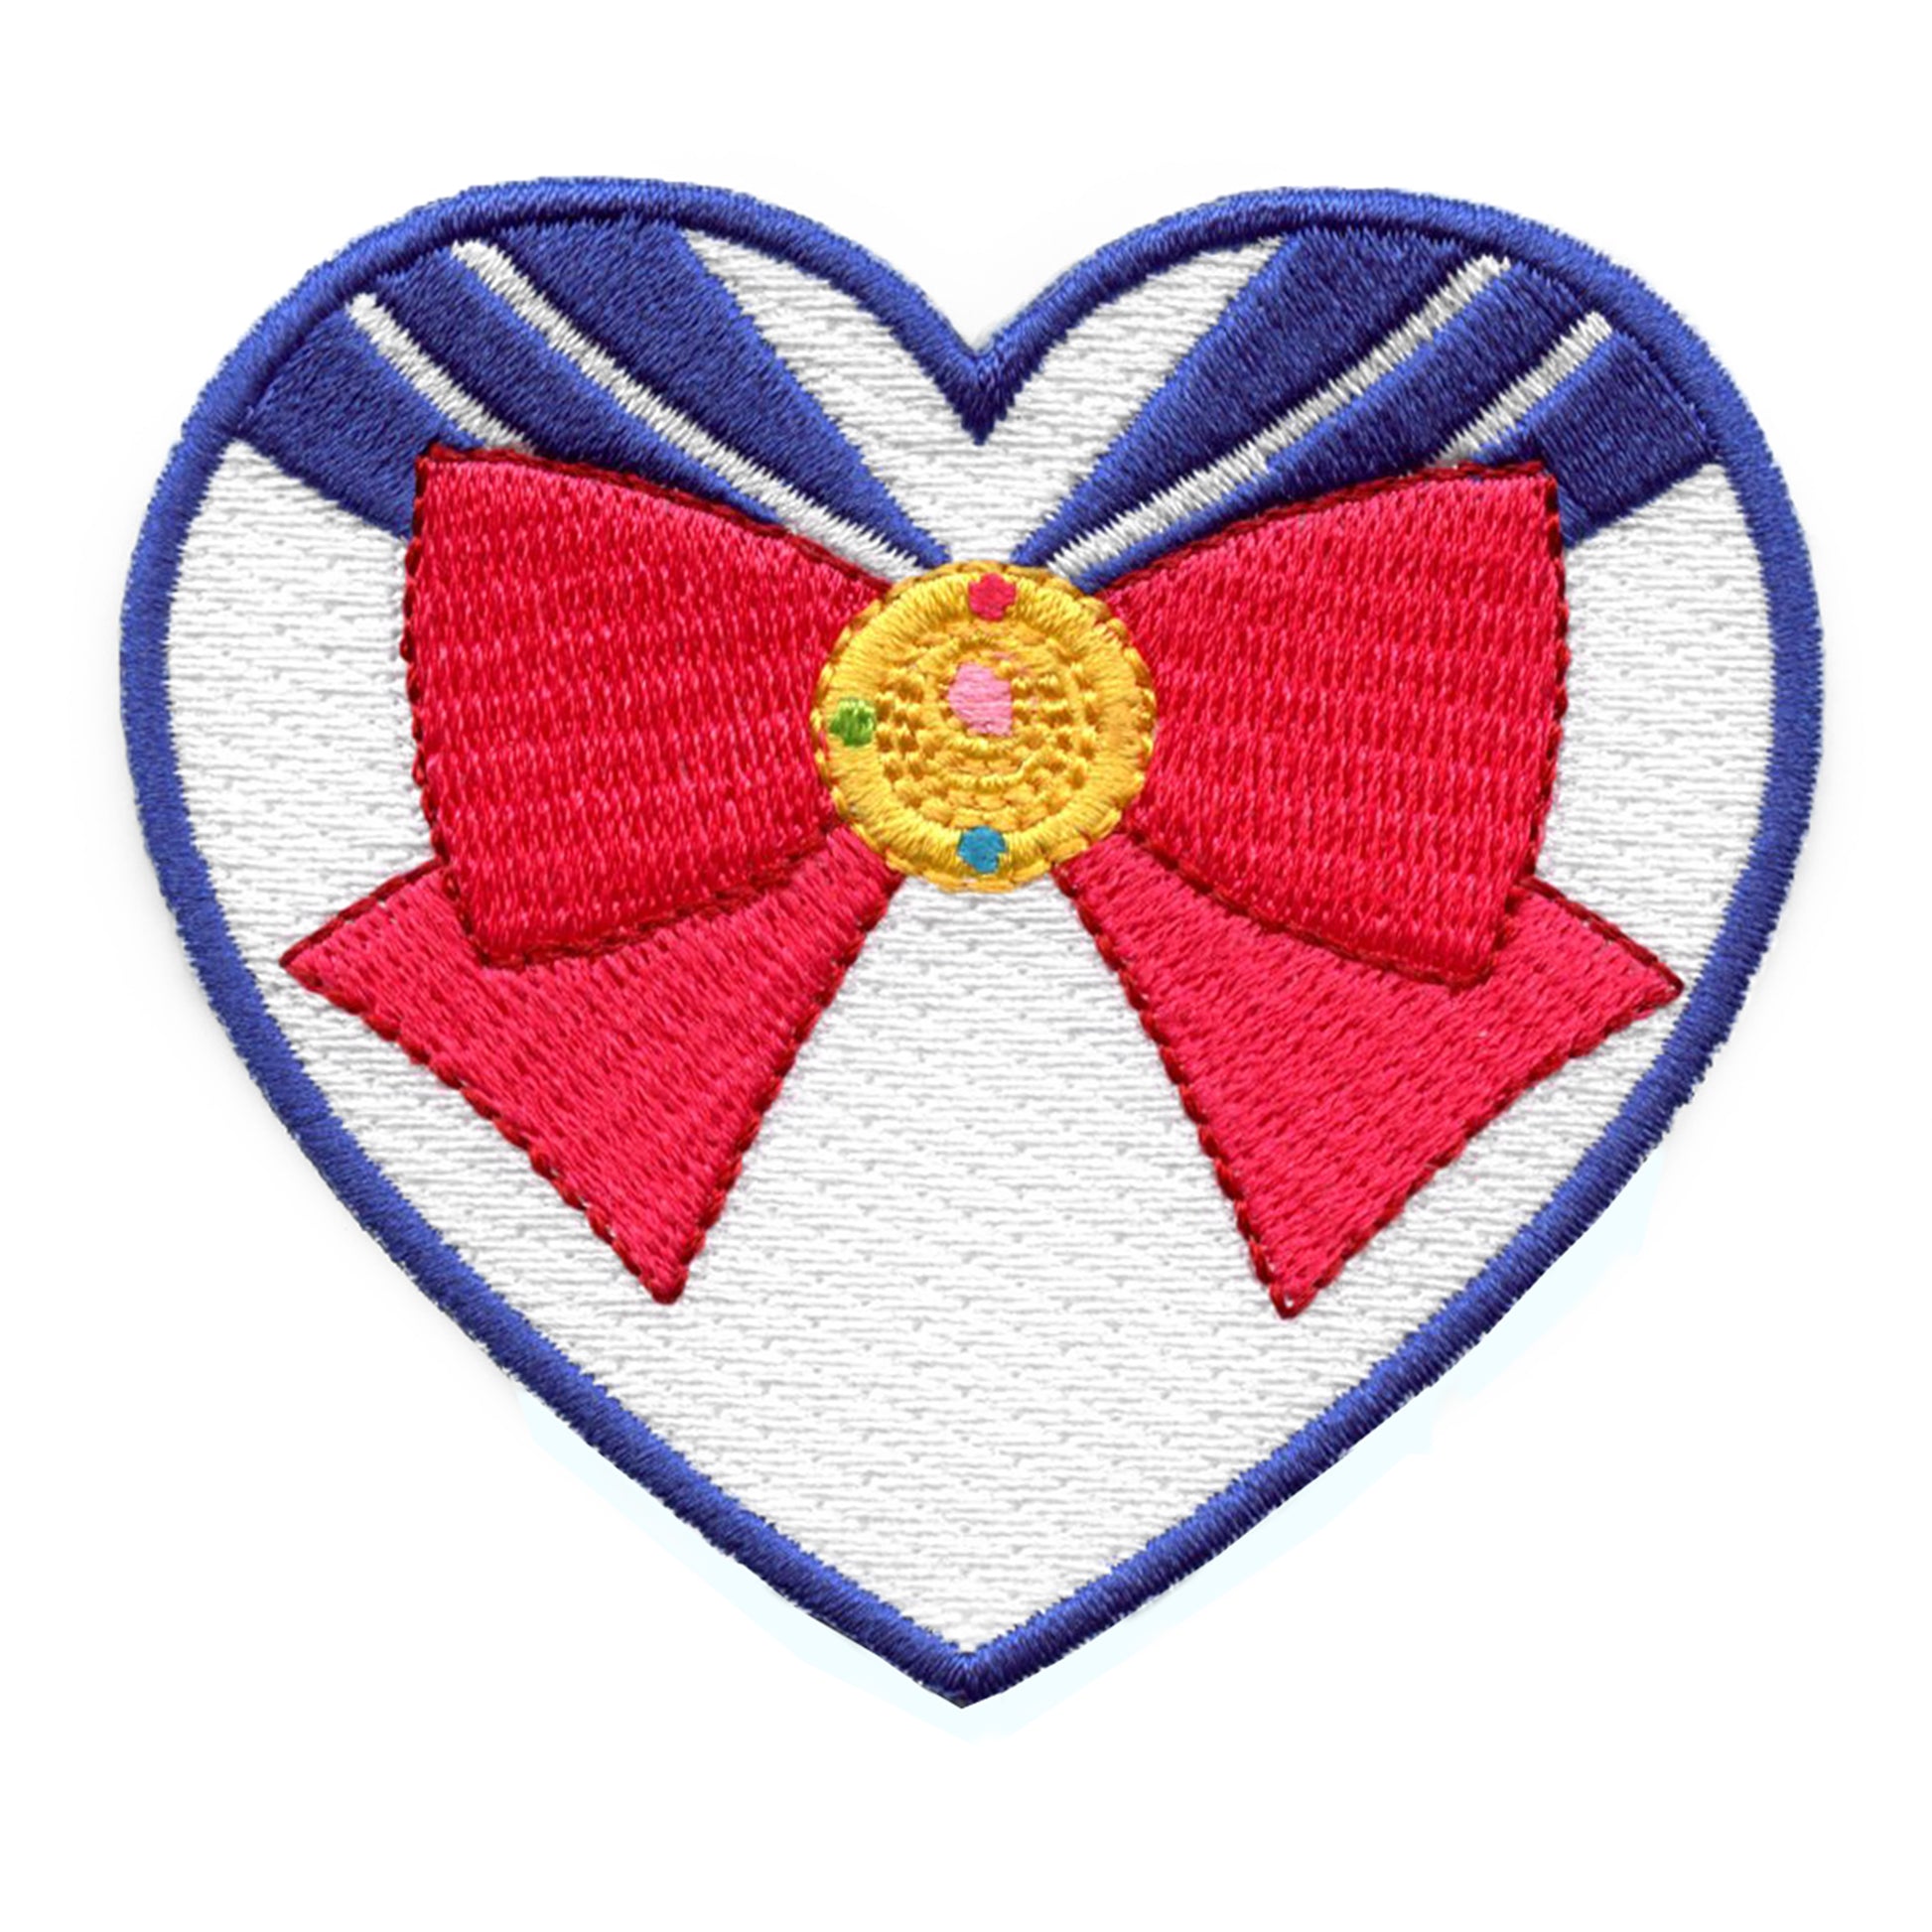 Luna and Artemis Patch, Iron On patch, embroided, anime patch, applique  Sailor Moon, Various sizes from 2,7 in to 11,8 in, Balck Friday